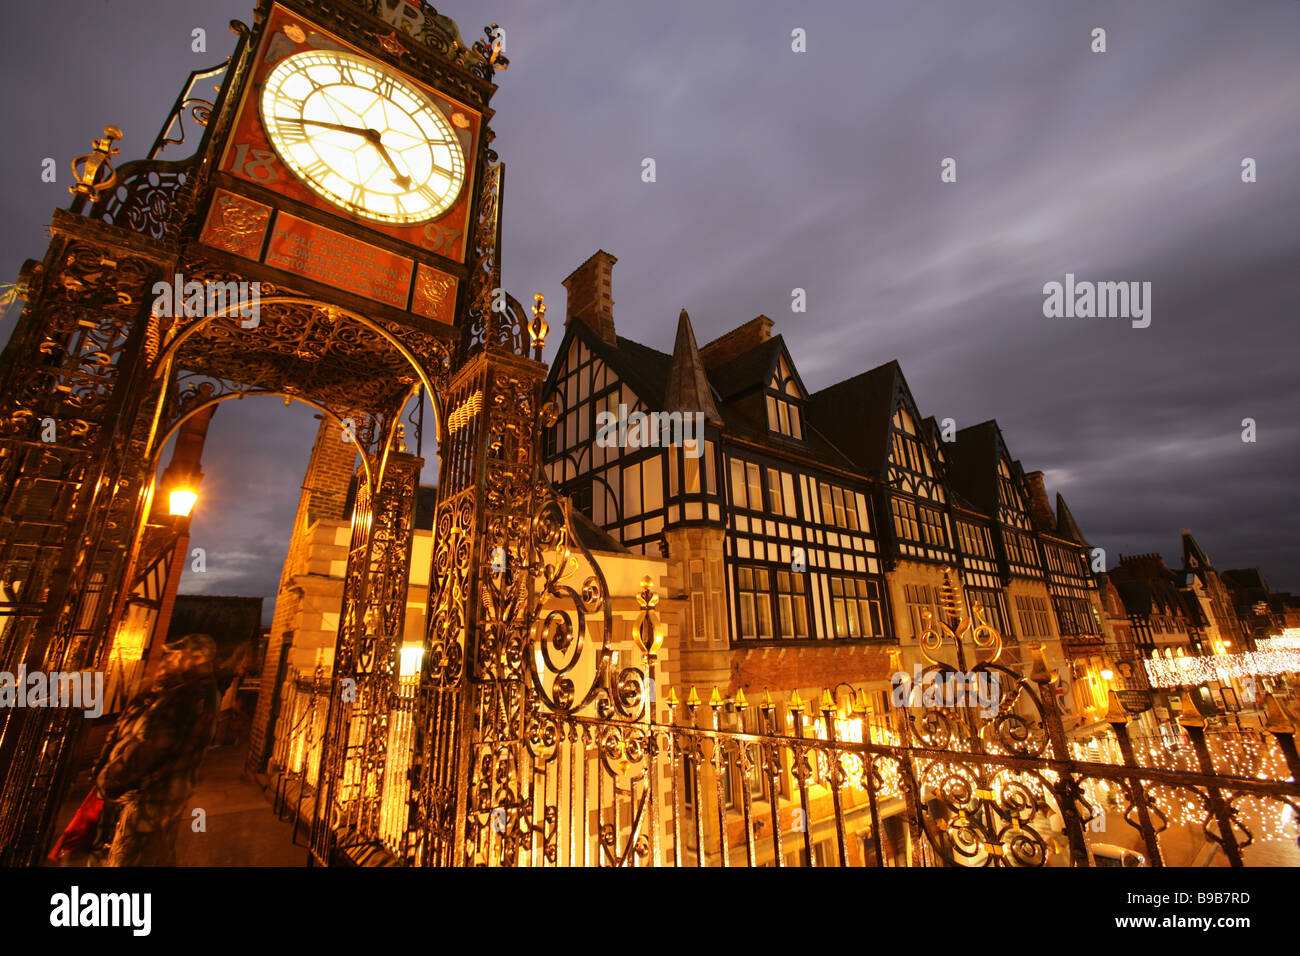 City of Chester, England. Dusk view of the Eastgate Clock, with Christmas street lights and decorations. Stock Photo